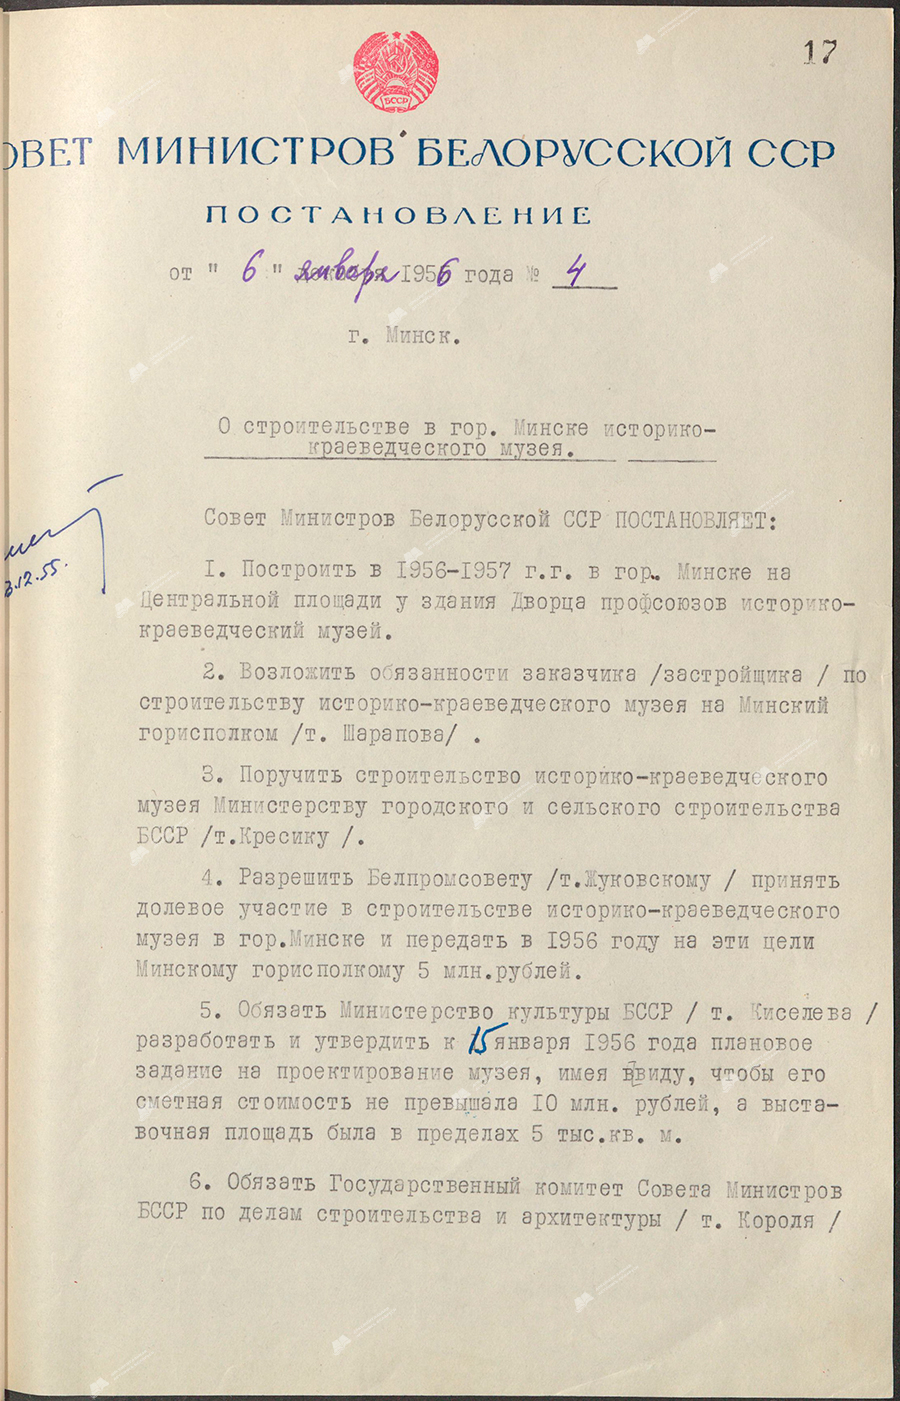 Resolution No. 4 of the Council of Ministers of the Byelorussian SSR «On construction in the city. Minsk Museum of History and Local Lore»-стр. 0